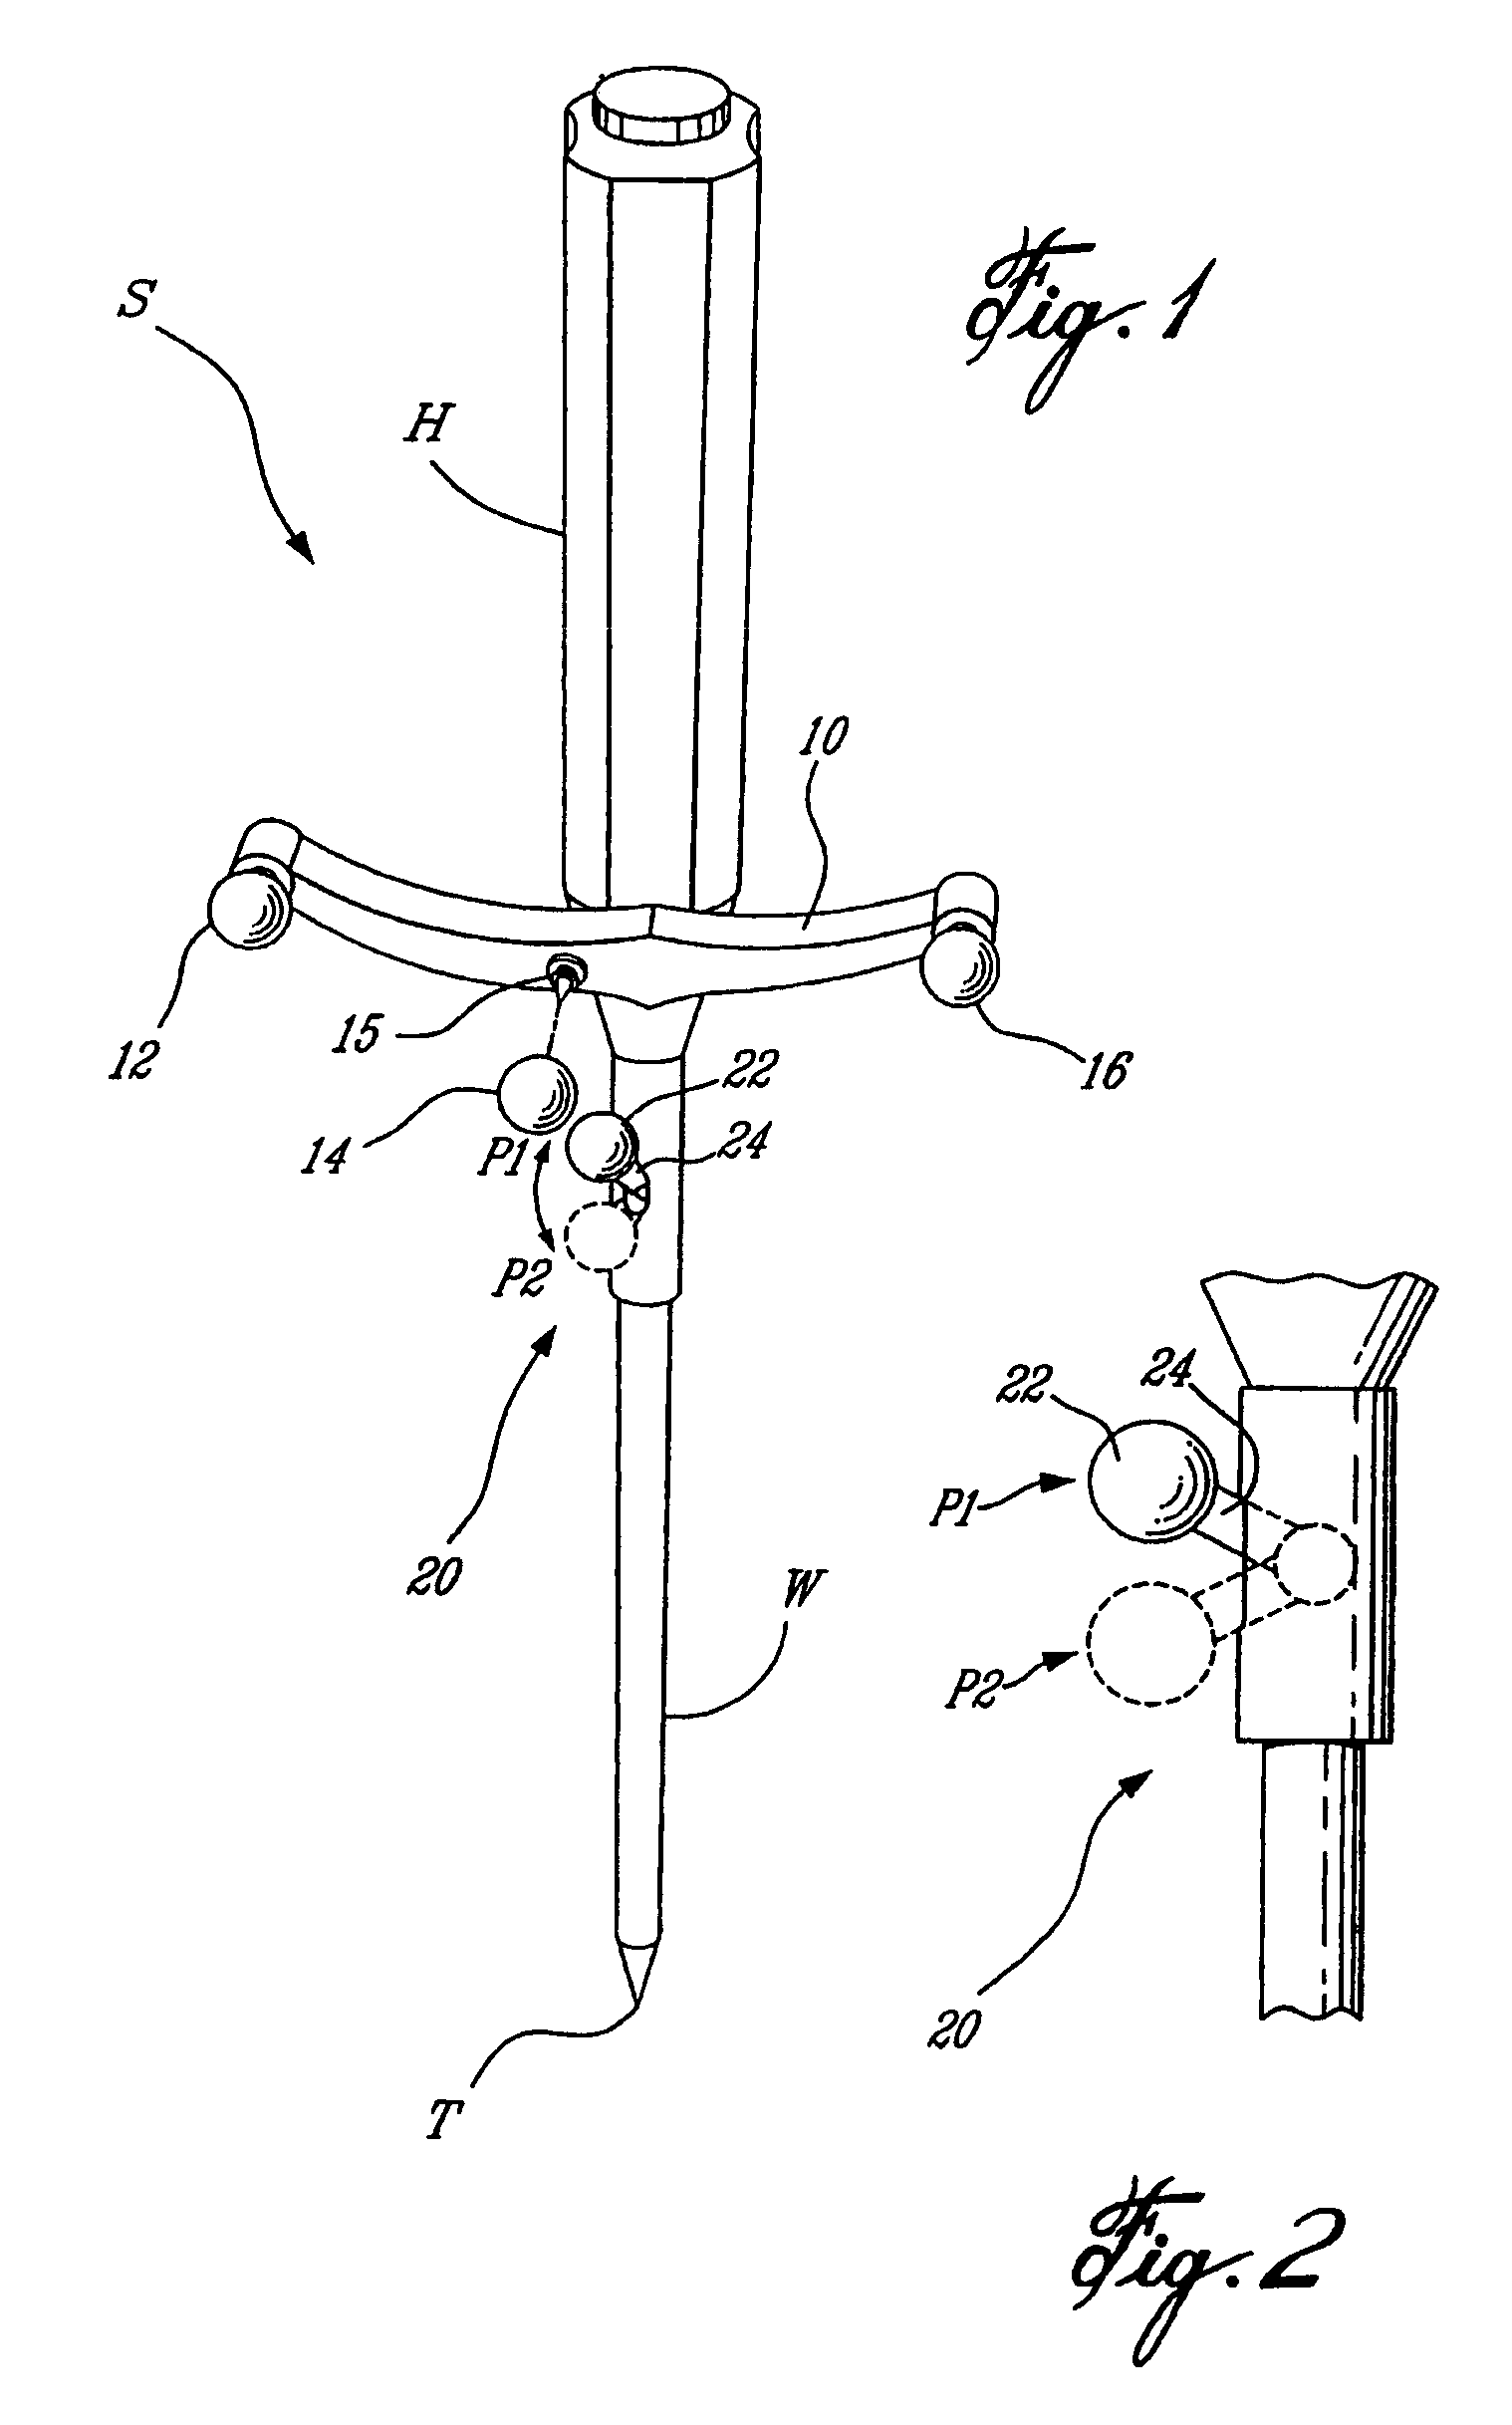 Interface apparatus for passive tracking systems and method of use thereof